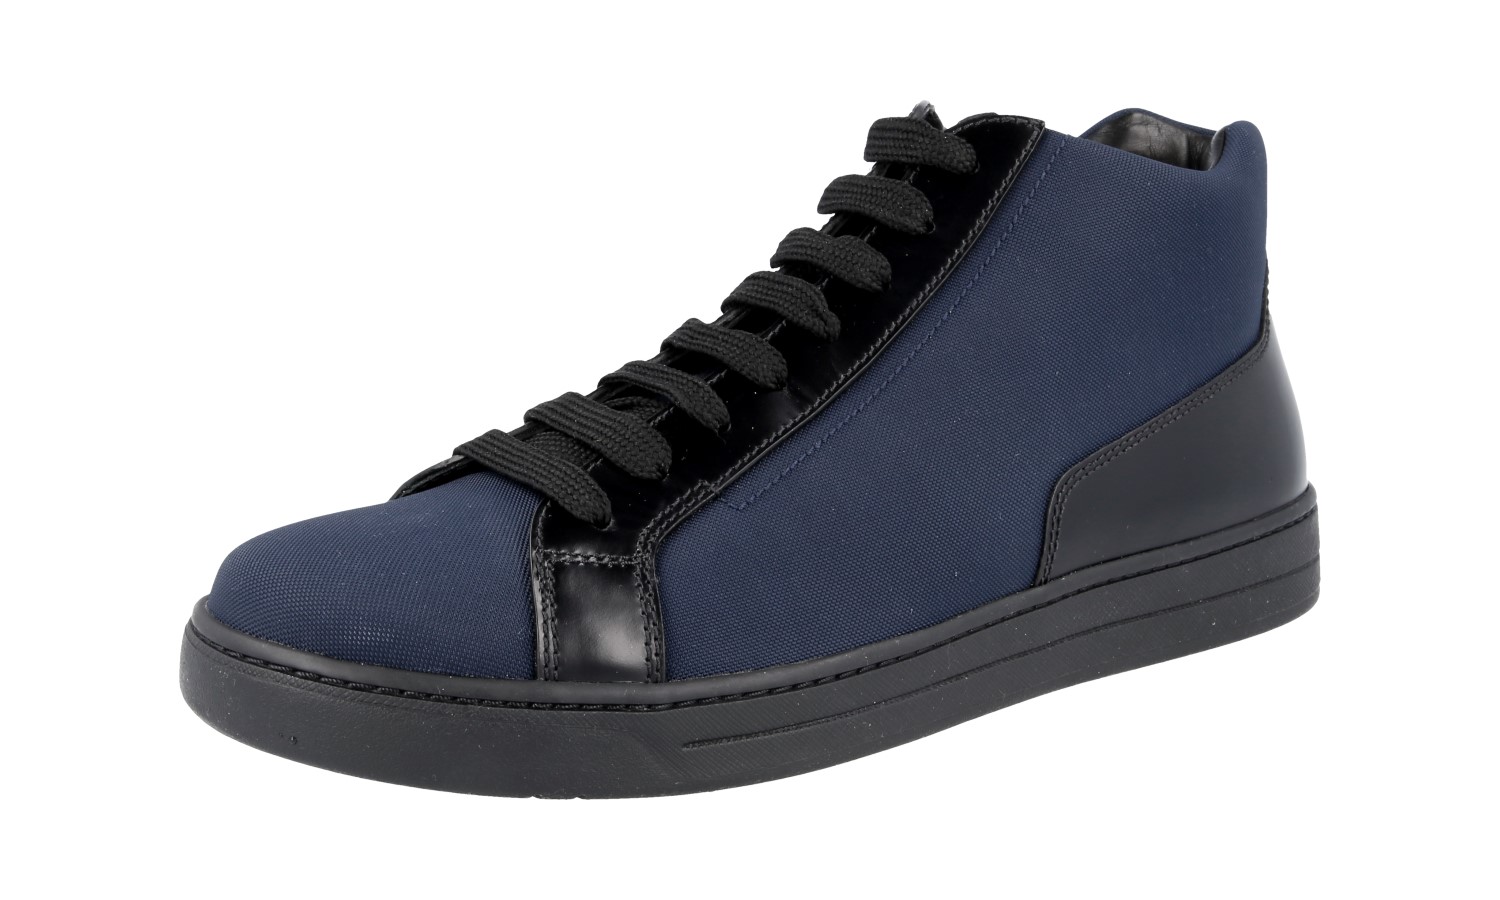 AUTHENTIC PRADA HIGH TOP SNEAKERS SHOES 4T2998 BLUE NEW 8,5 42,5 43 | eBay